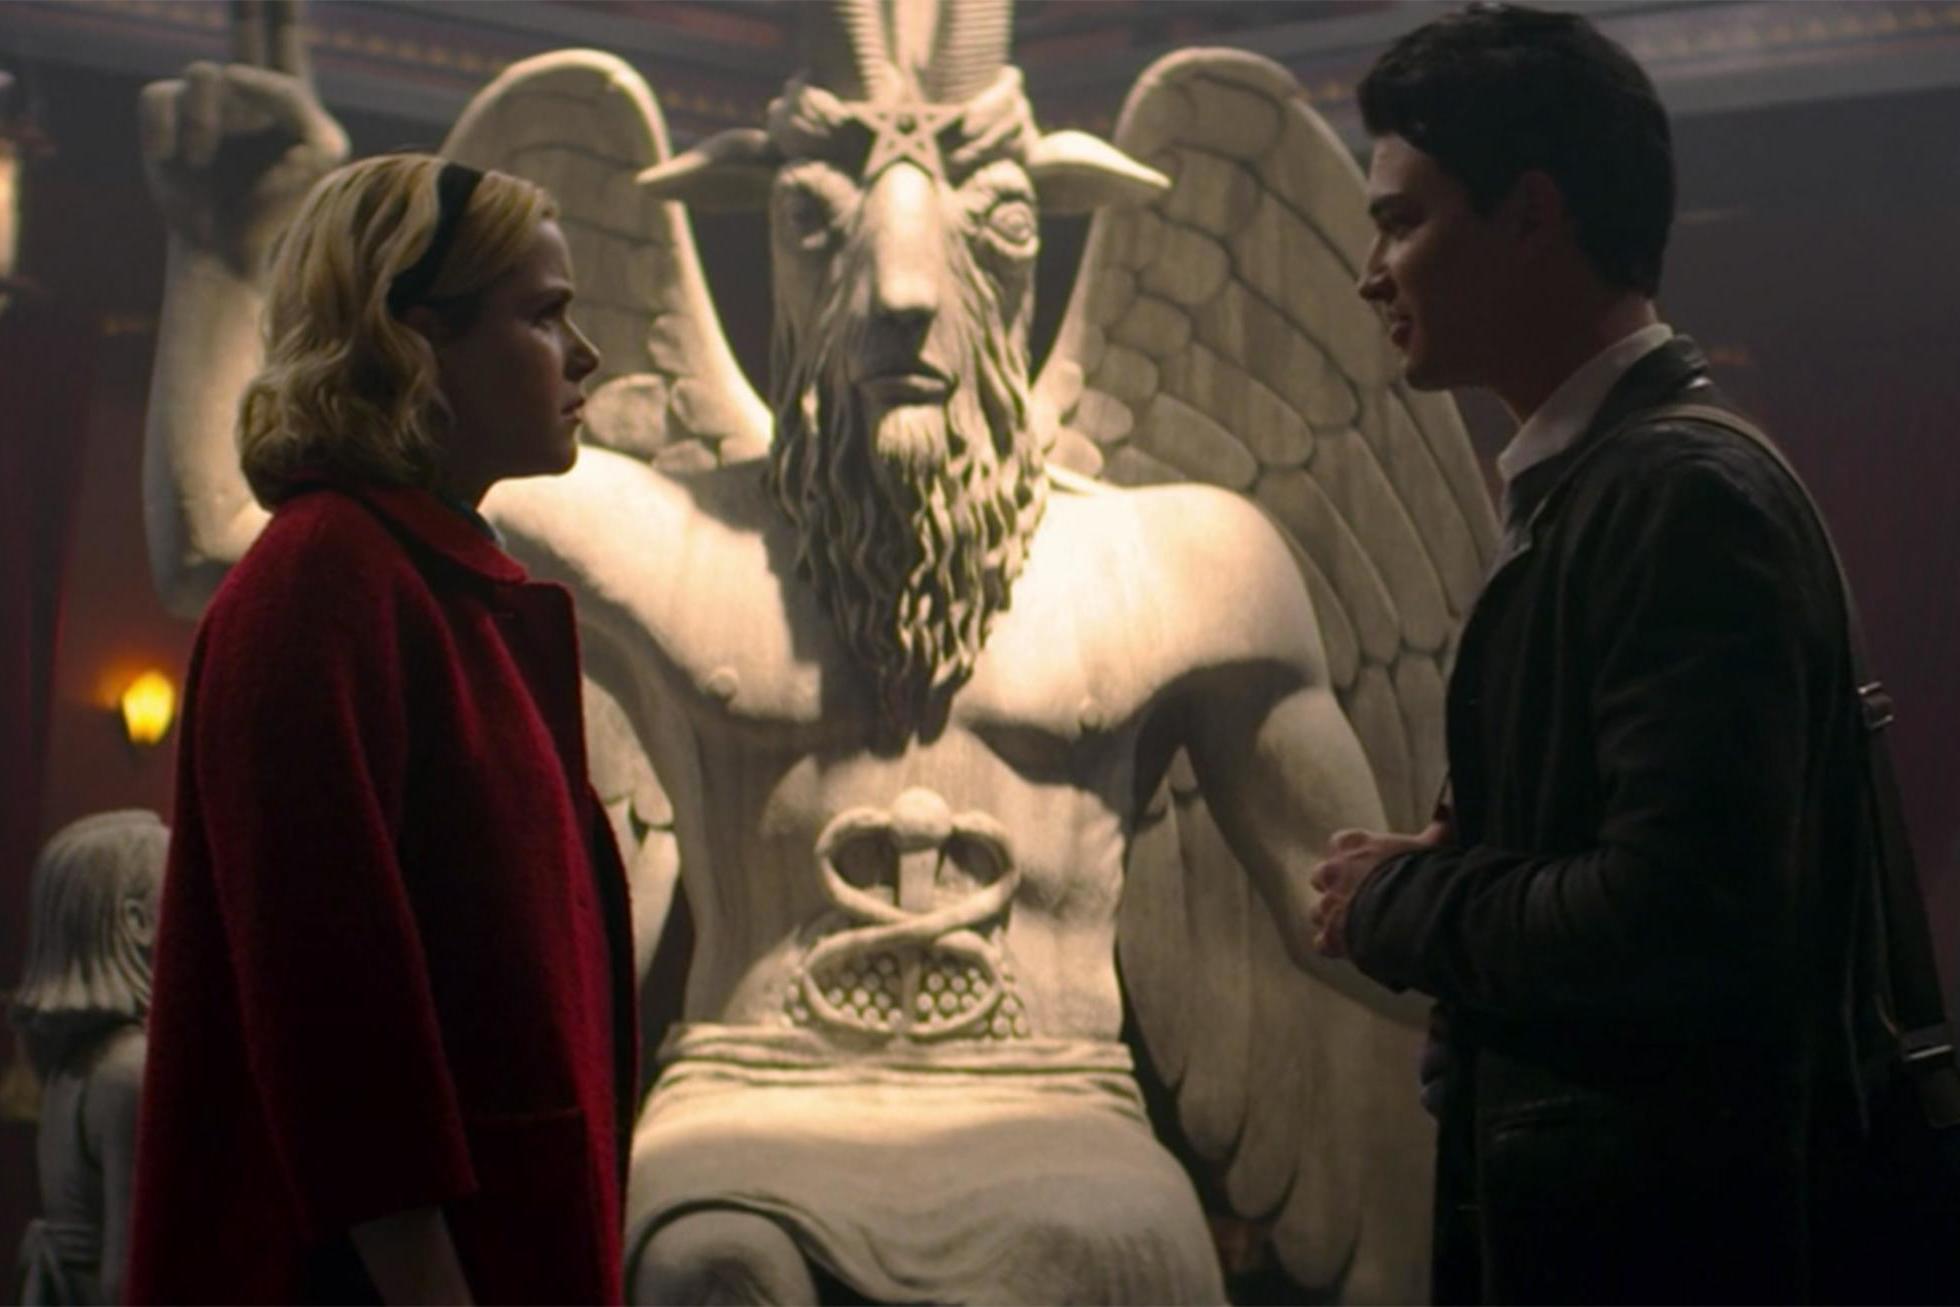 Netflix was sued for featuring ‘Baphomet with Children’ in the ‘Chilling Adventures of Sabrina’